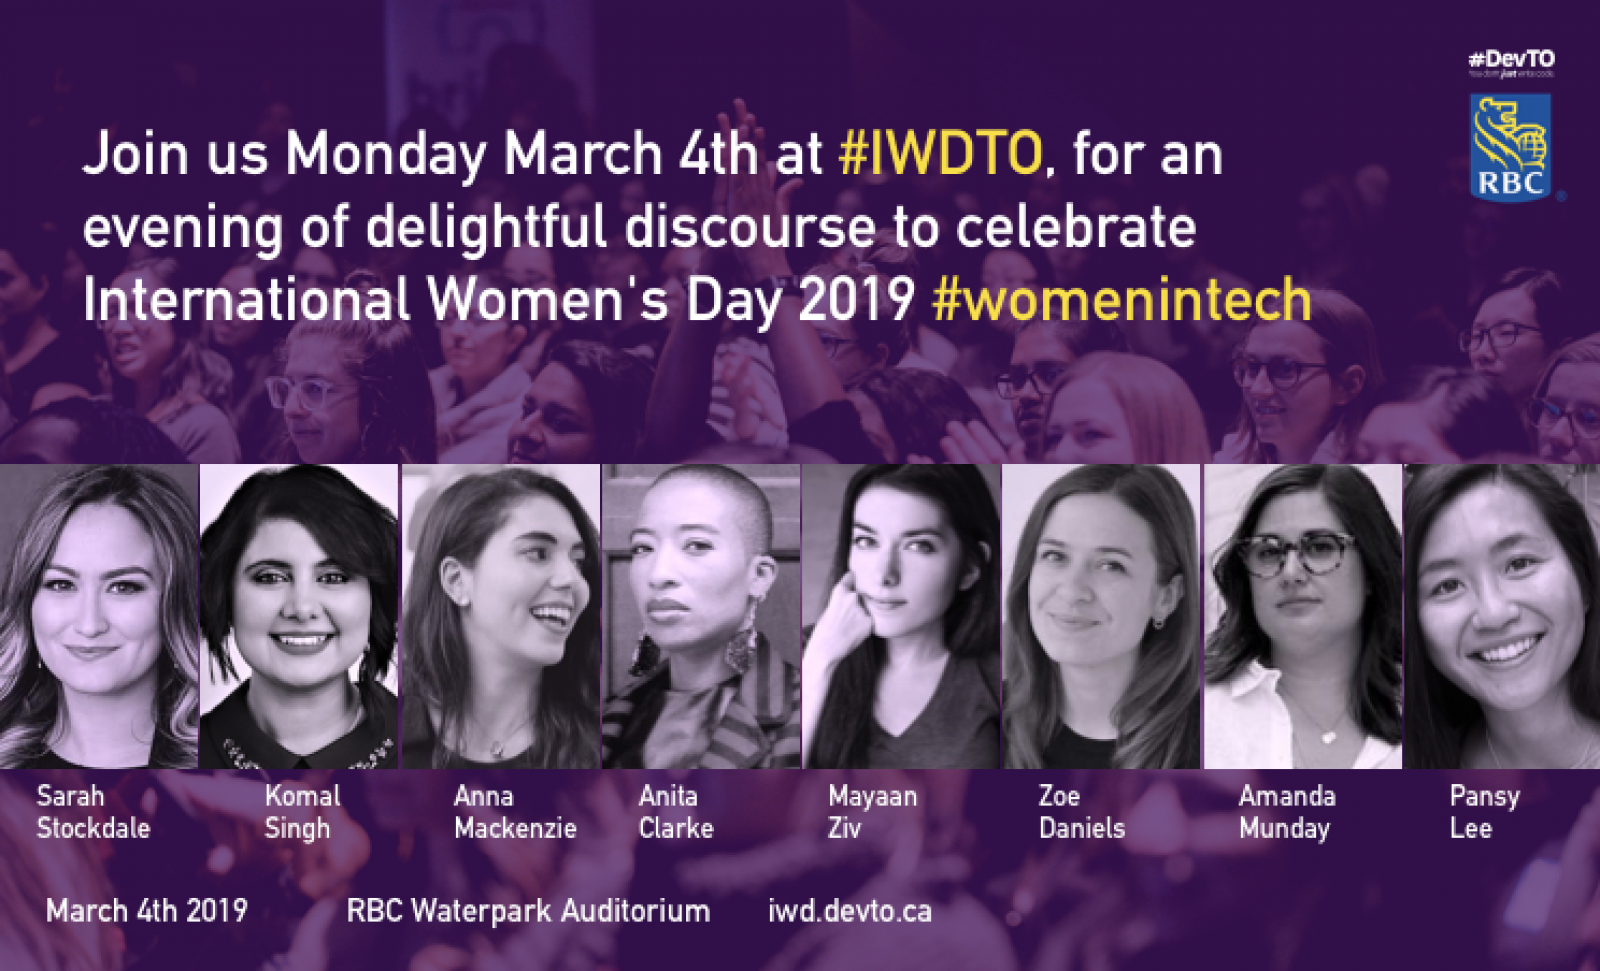 #IWDTO on March 4th